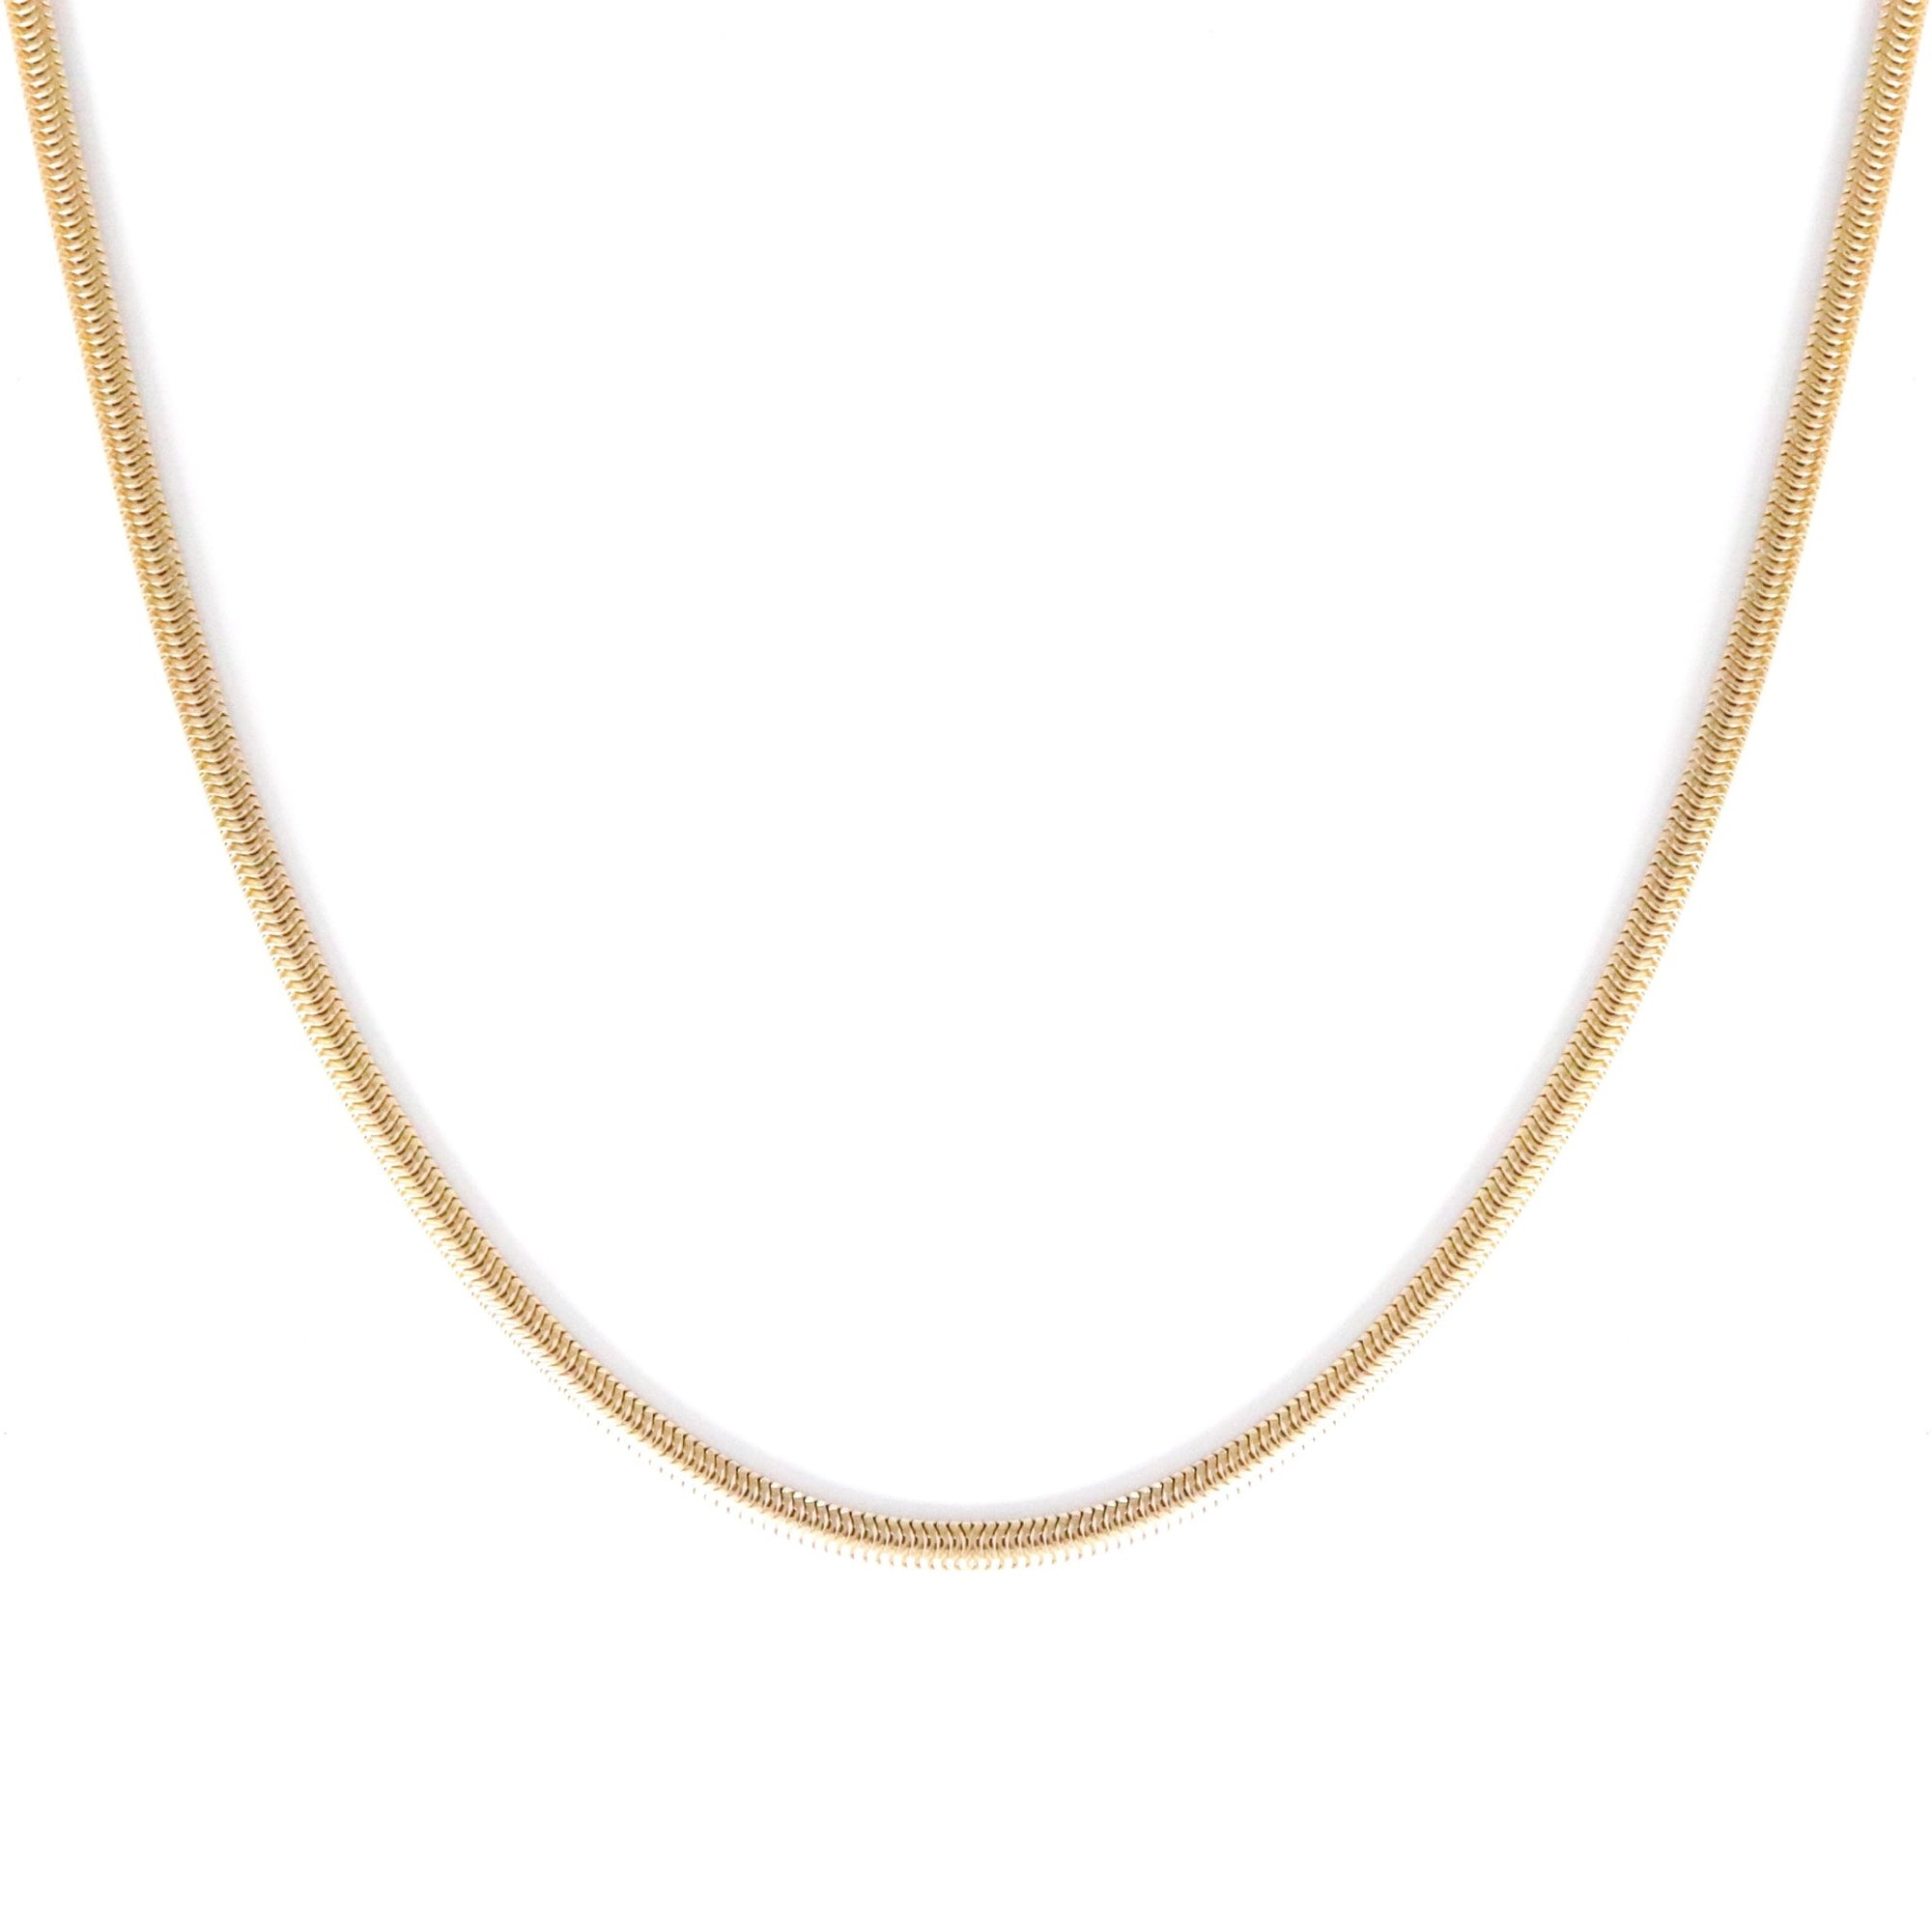 FEARLESS COBRA NECKLACE - GOLD - SO PRETTY CARA COTTER